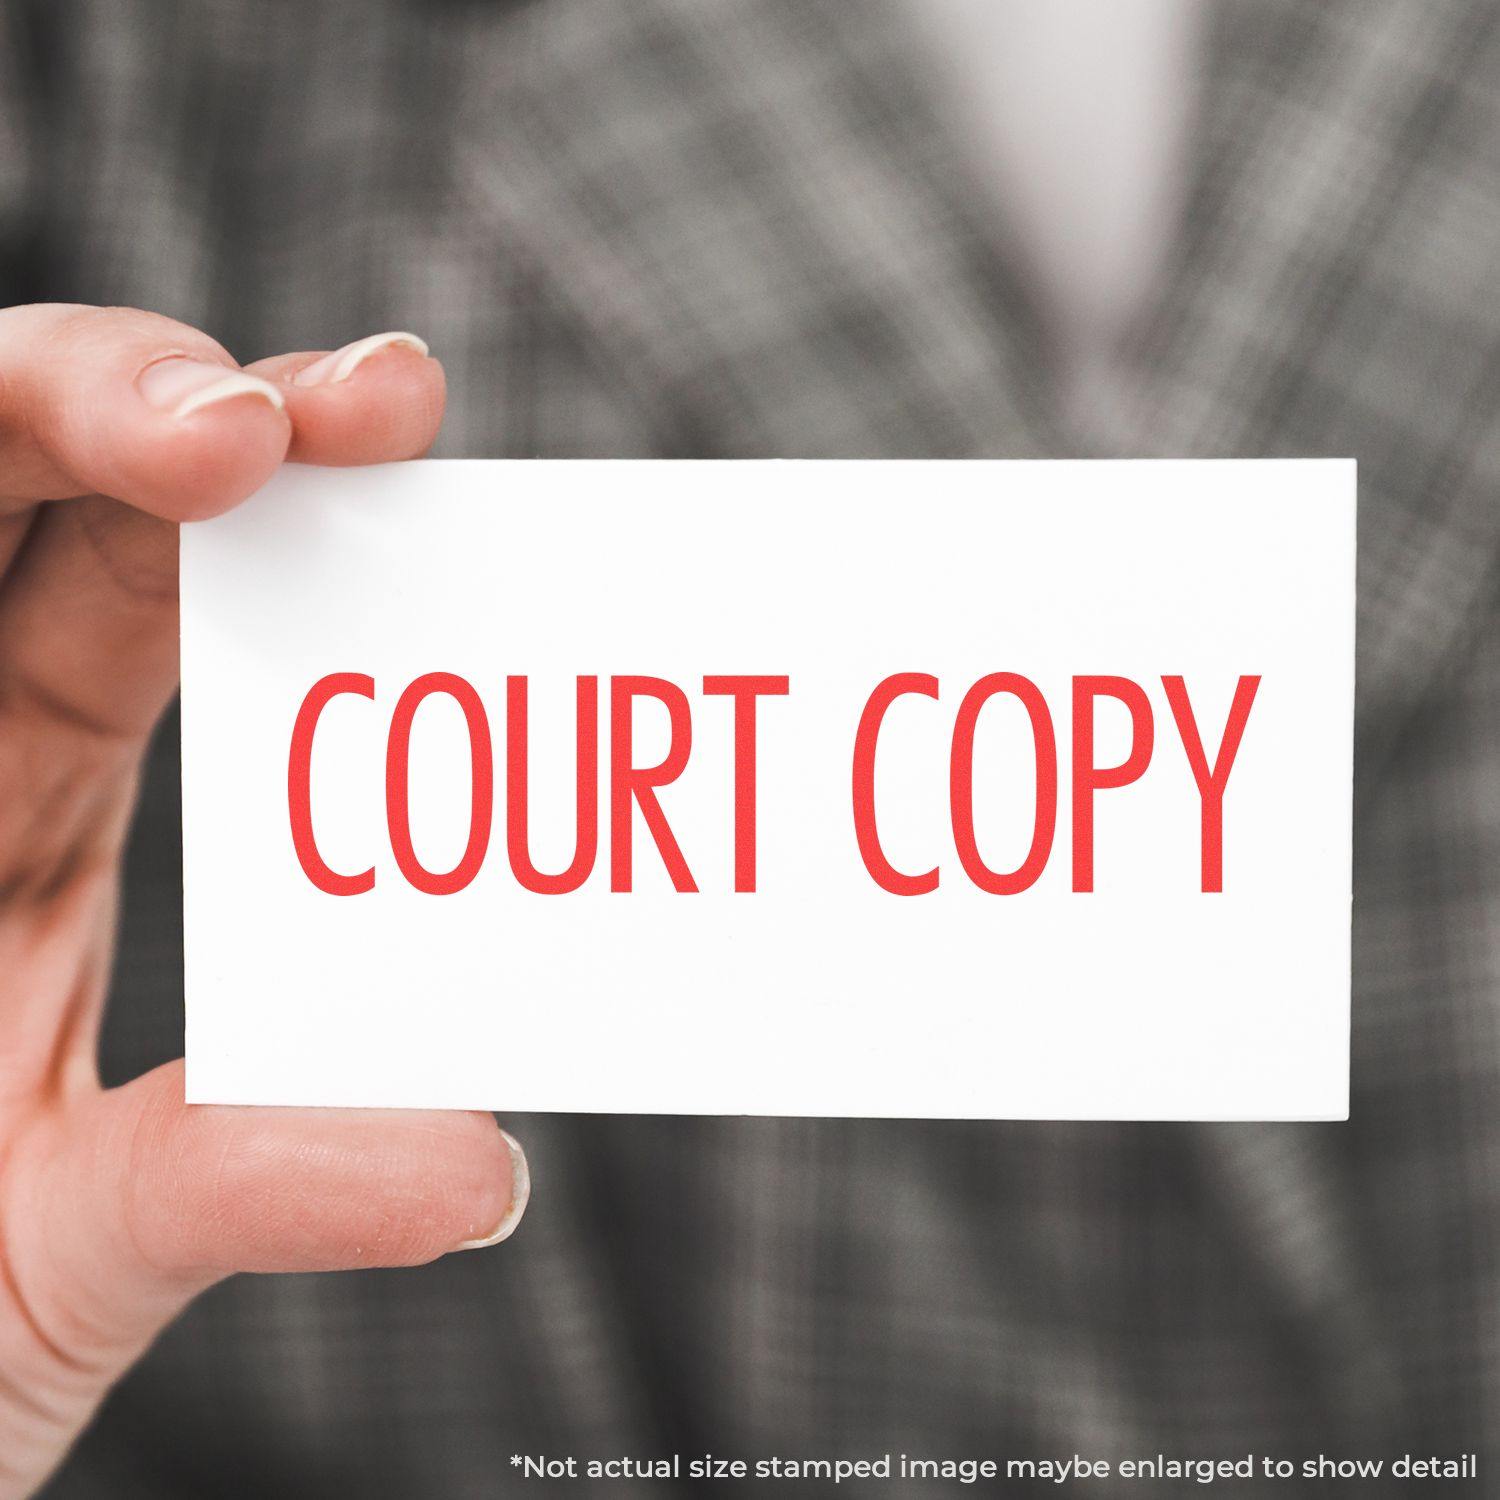 A stock office rubber stamp with a stamped image showing how the text "COURT COPY" in a narrow font is displayed after stamping.